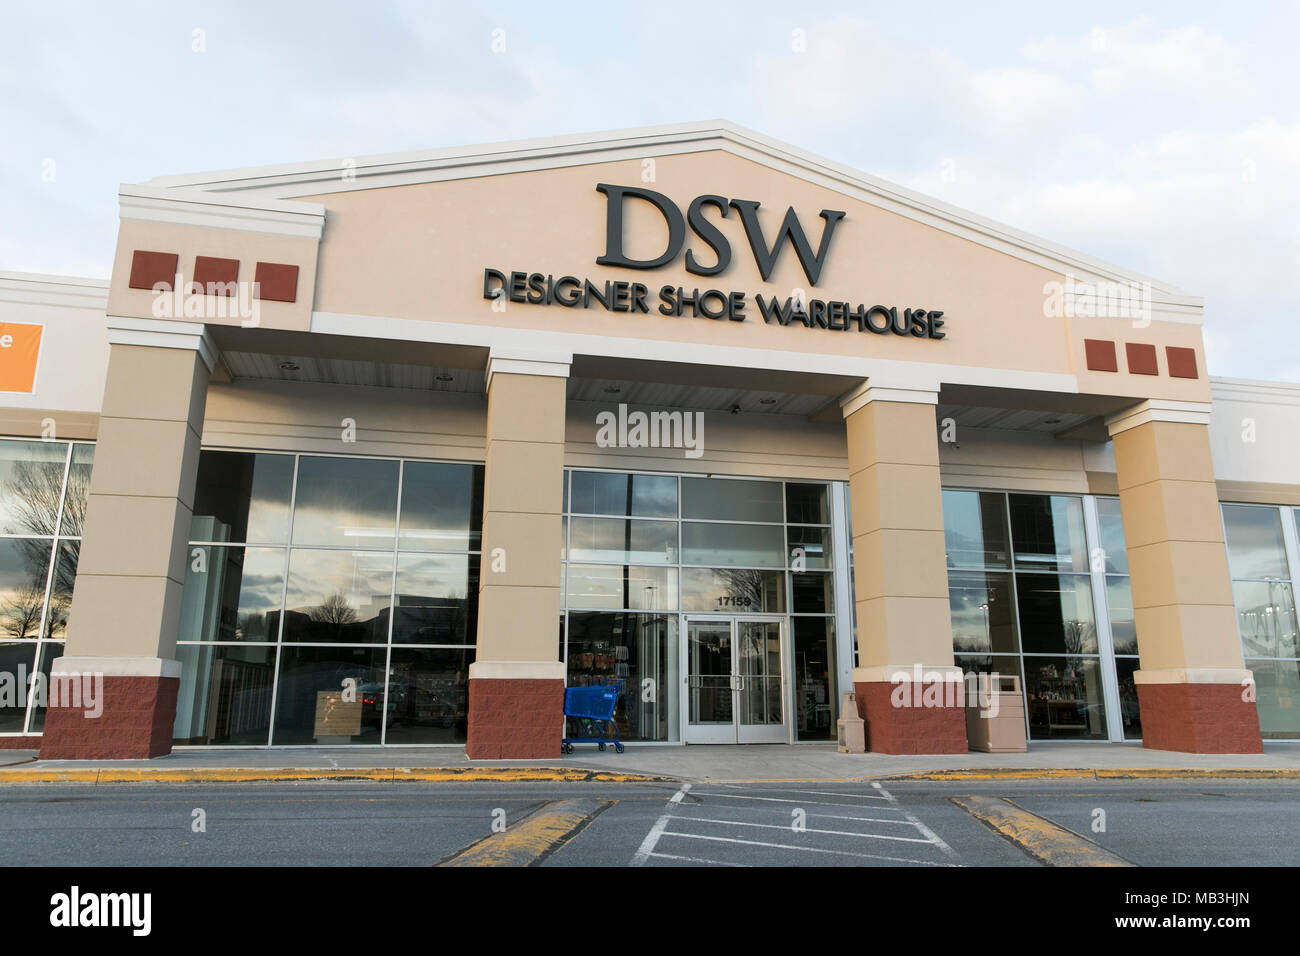 A DSW (Designer Shoe Warehouse) logo seen on a retail store front in Hagerstown, Maryland on April 5, 2018. Stock Photo